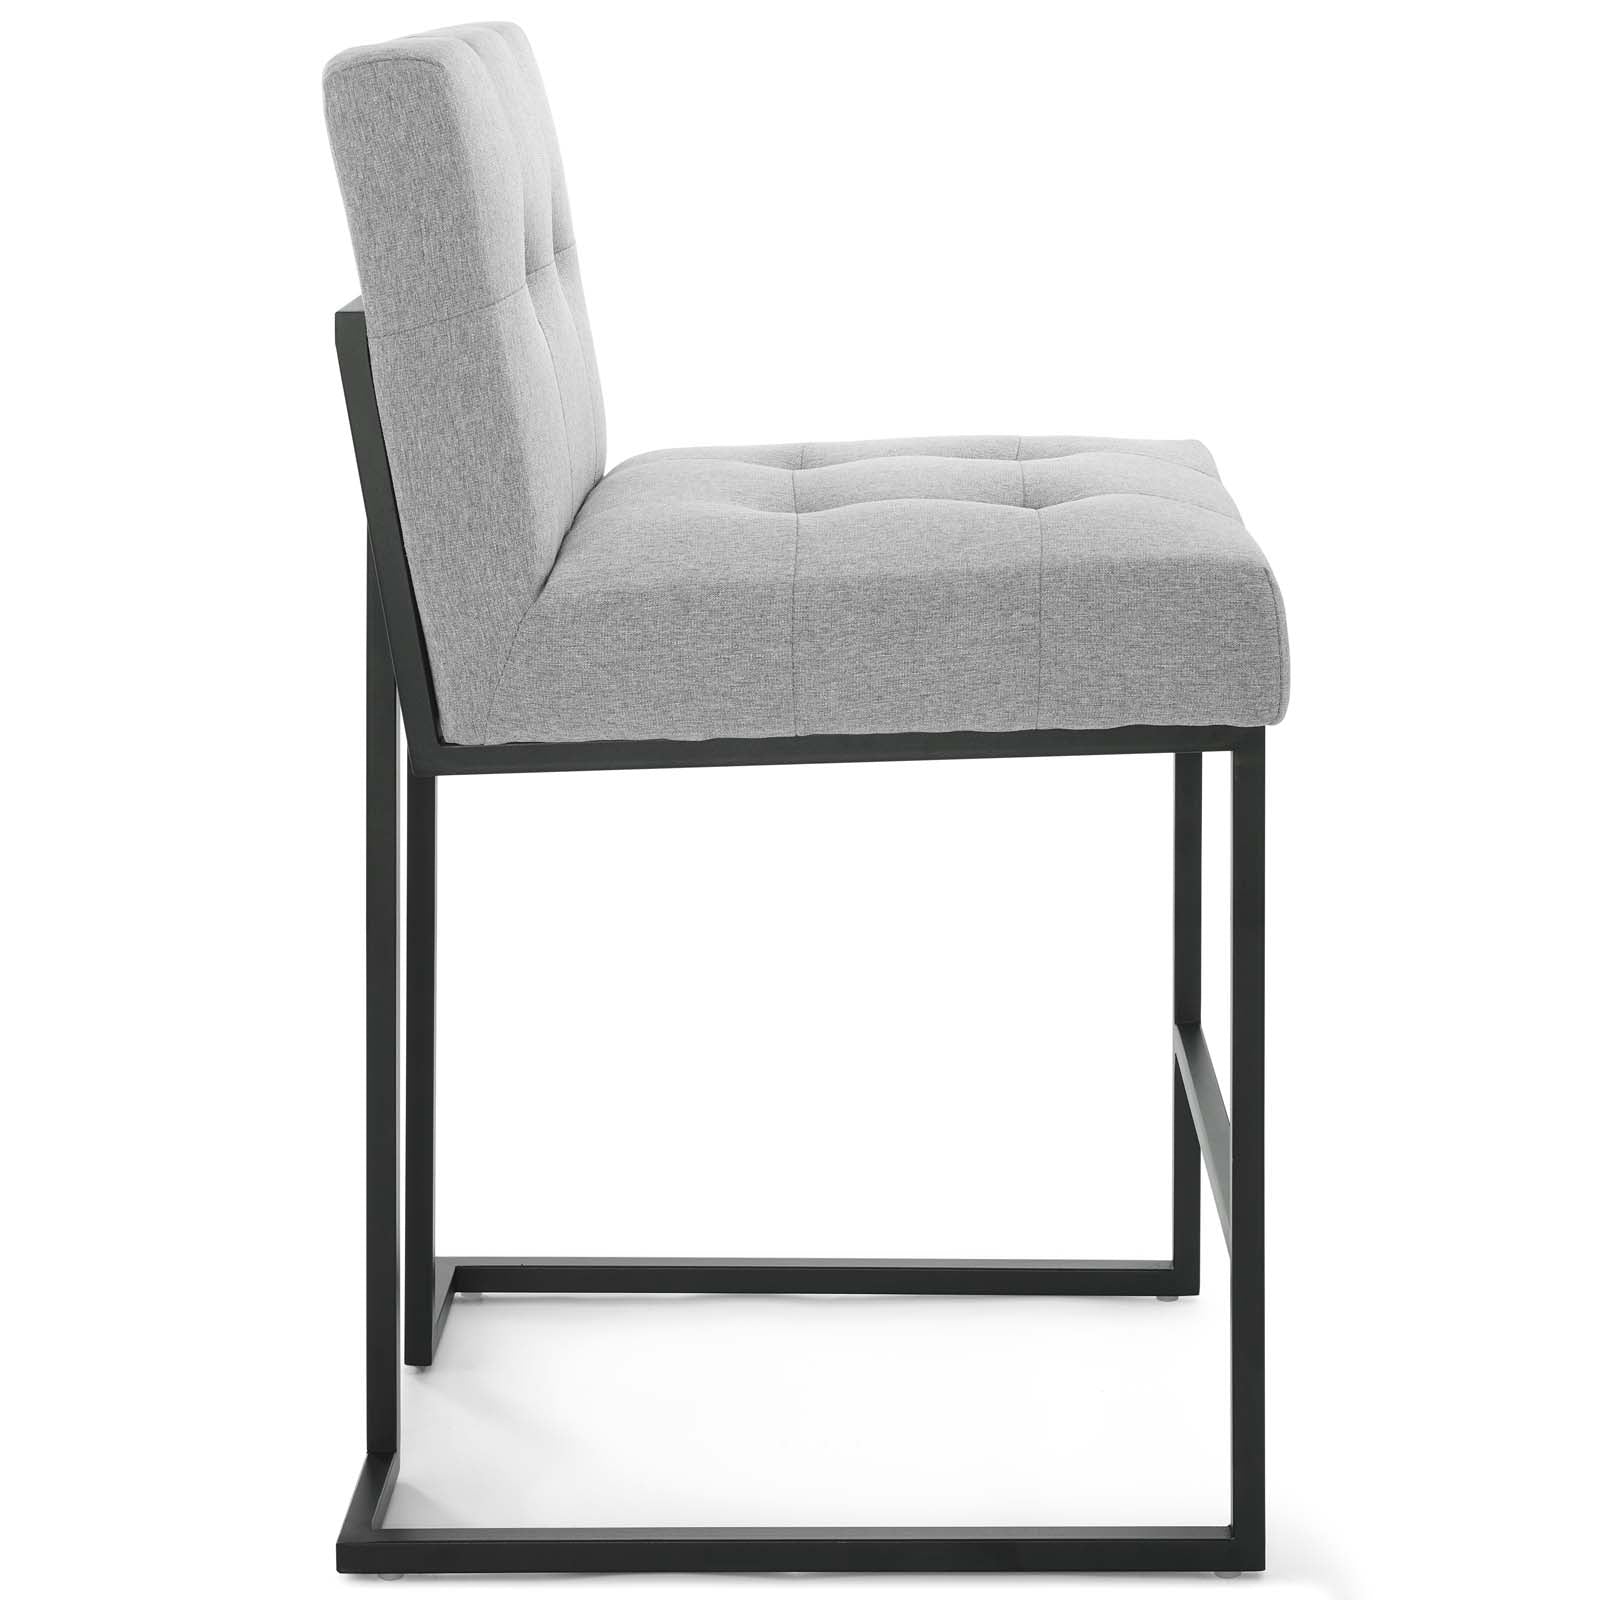 Privy Black Stainless Steel Upholstered Fabric Counter Stool - East Shore Modern Home Furnishings